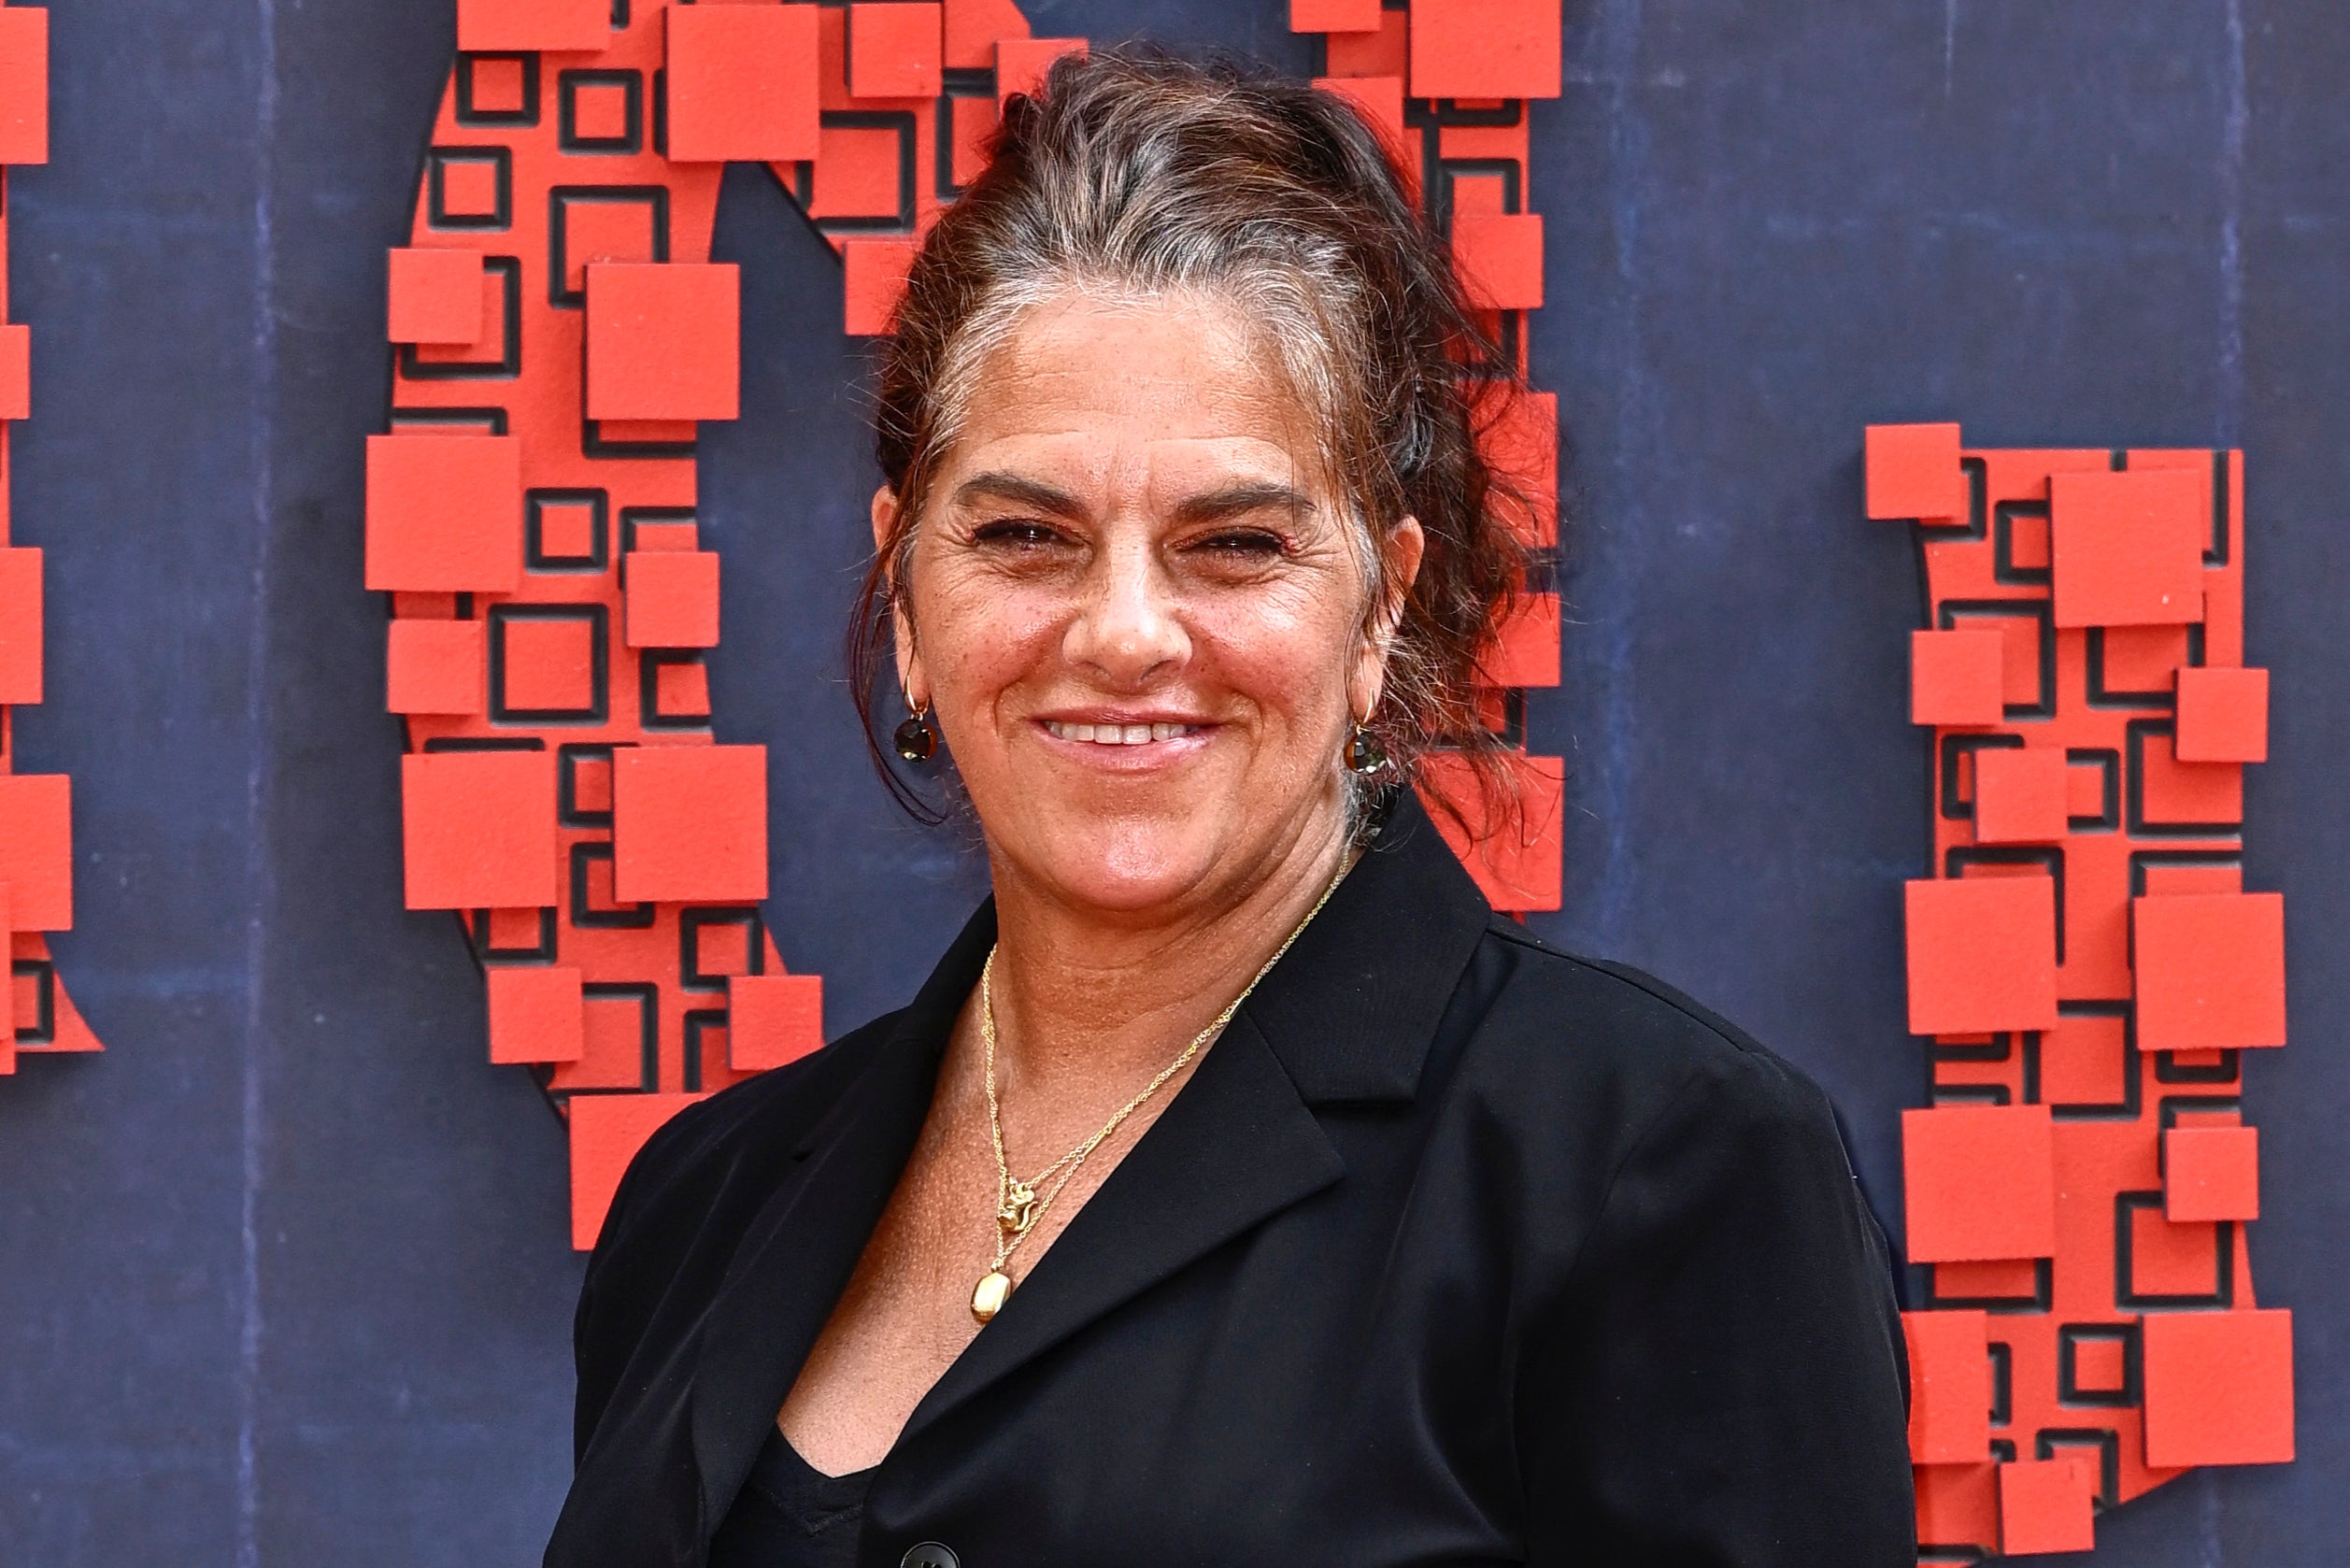 Tracey Emin is known for her autobiographical and confessional artwork.